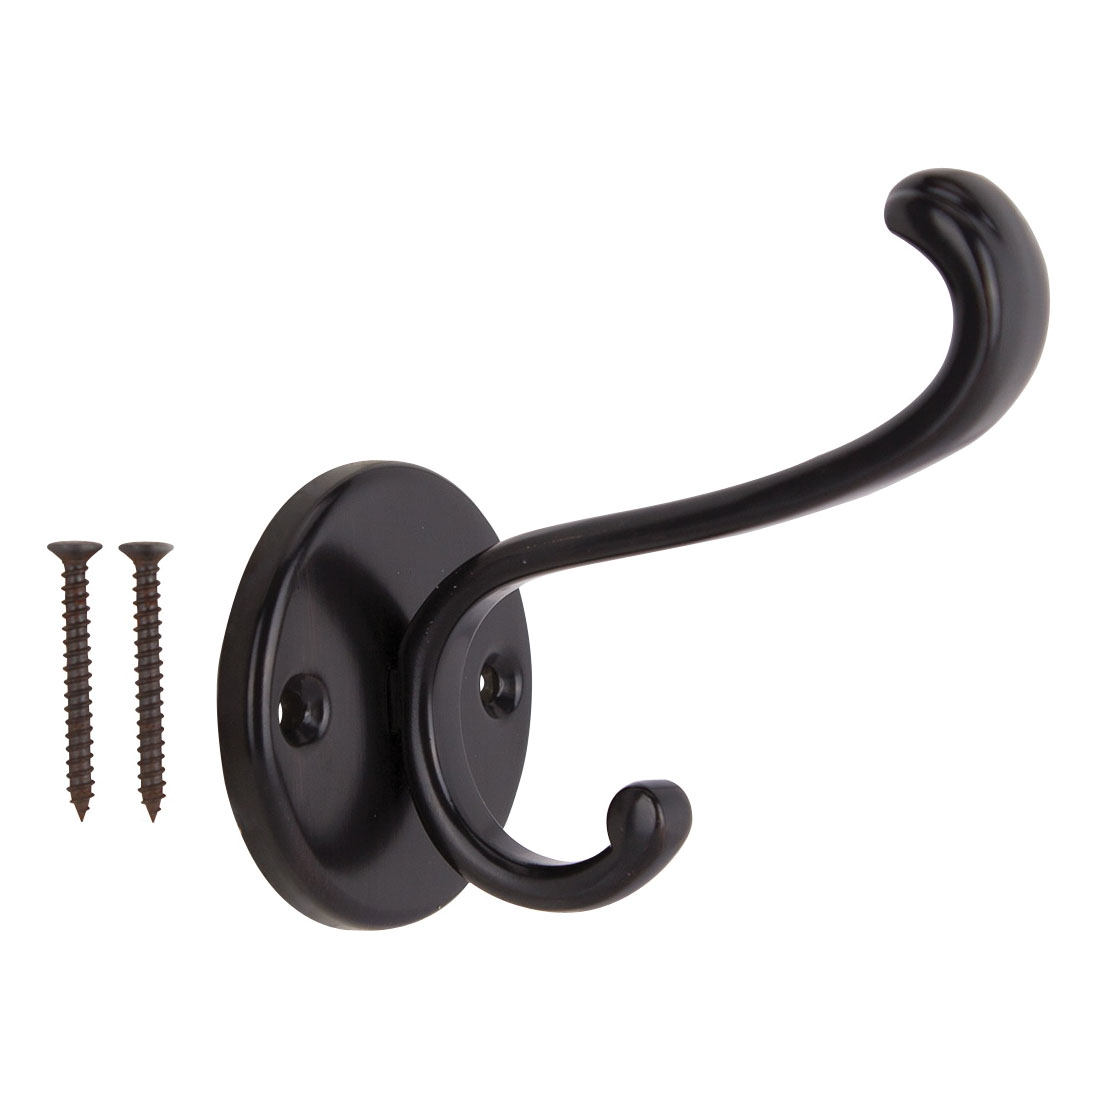 H-032-10B Coat and Hat Hook, 22 lb, 2-Hook, 1 in Opening, Zinc, Oil-Rubbed Bronze